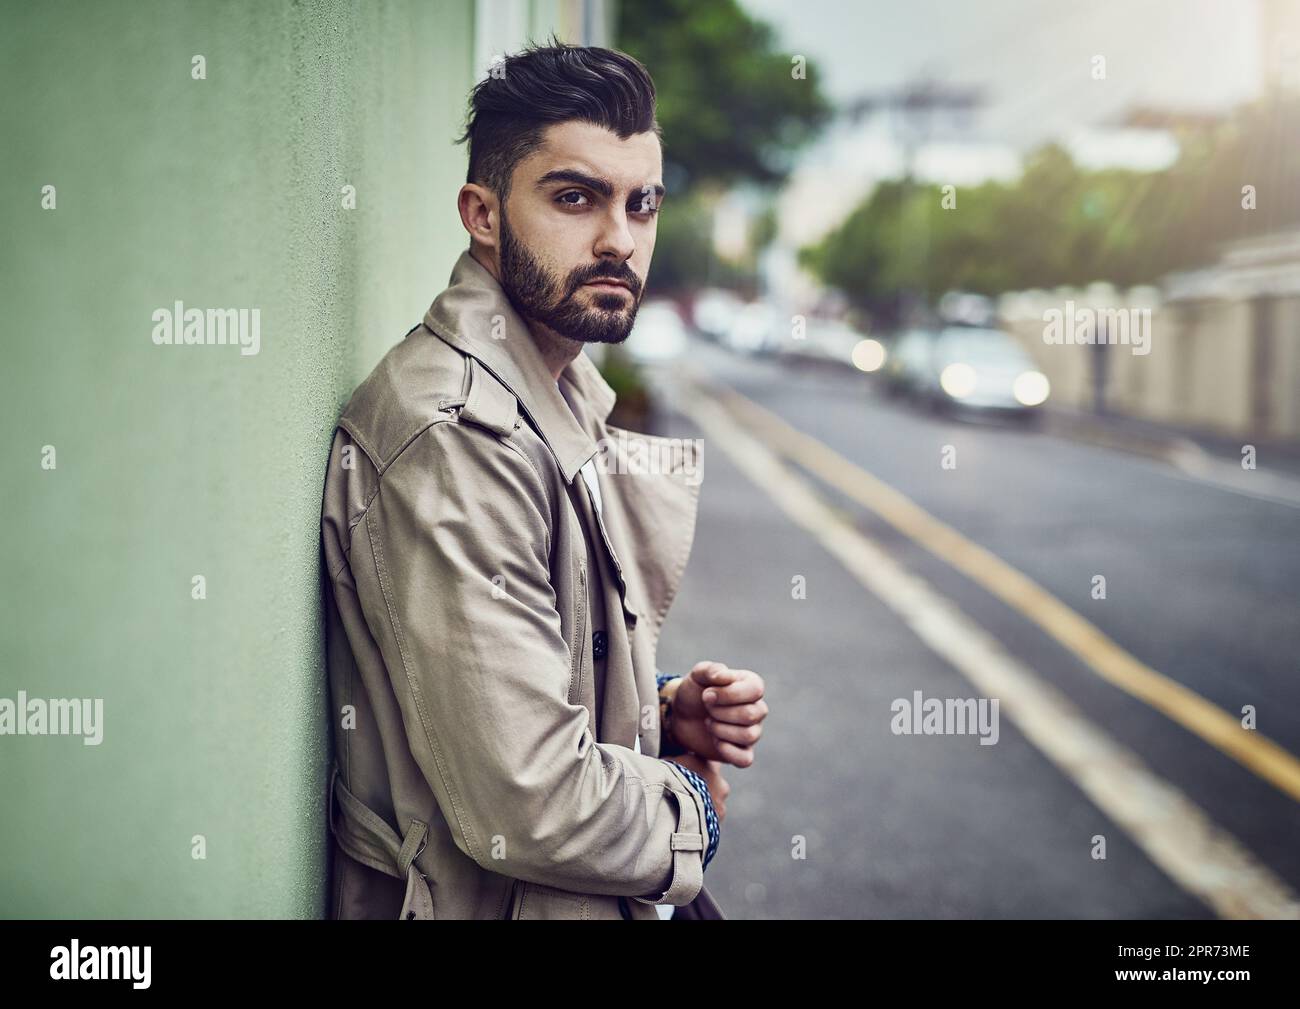 Style that takes its cue from city life. Portrait of a fashionable young man wearing urban wear in the city. Stock Photo